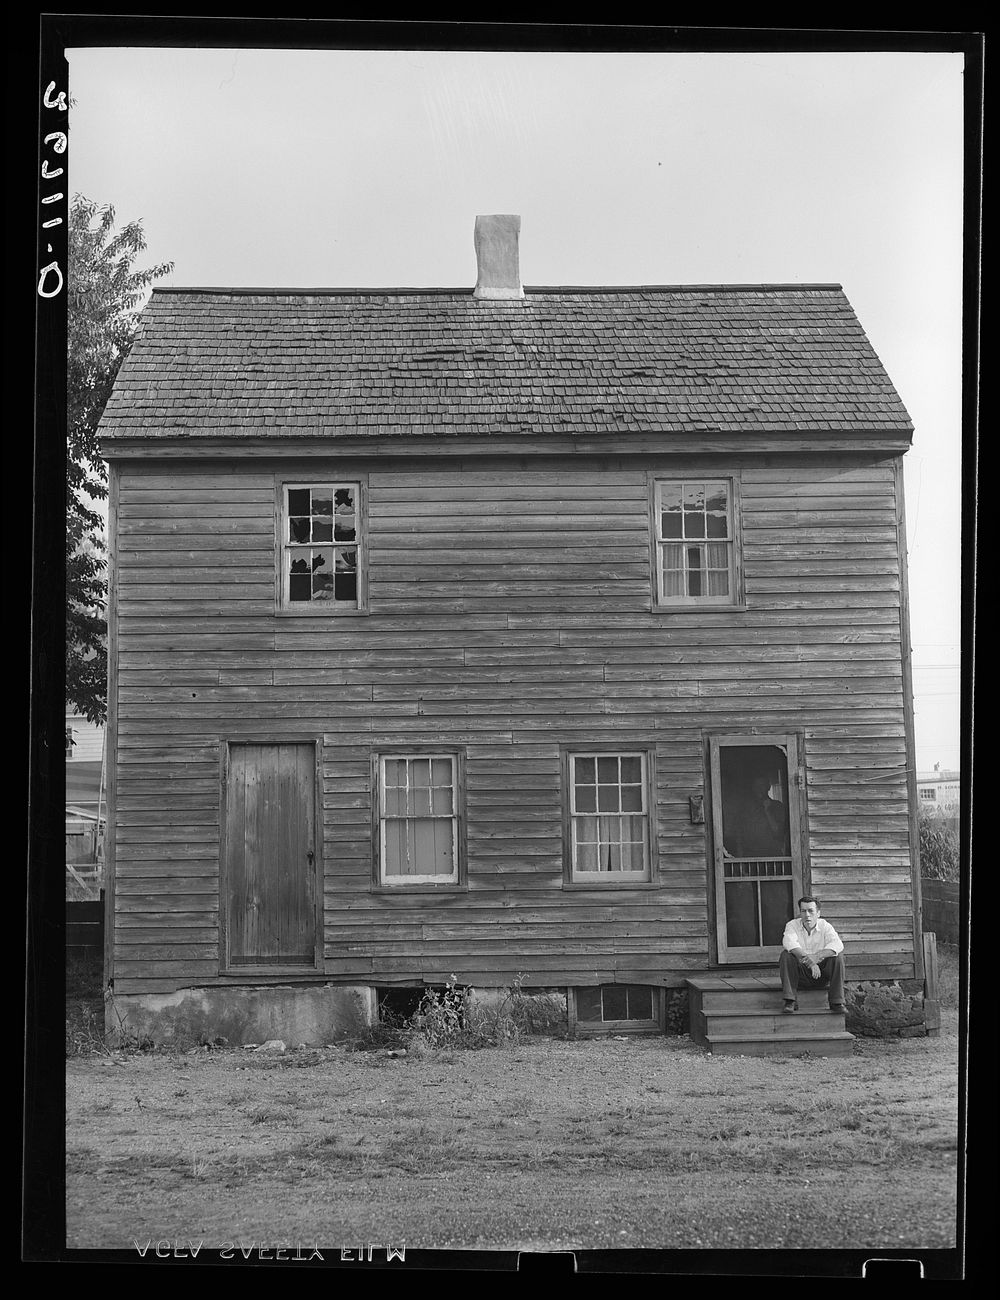 Inadequate housing forces mill workers to pay high rent for shacks like this. Millville, New Jersey. Sourced from the…